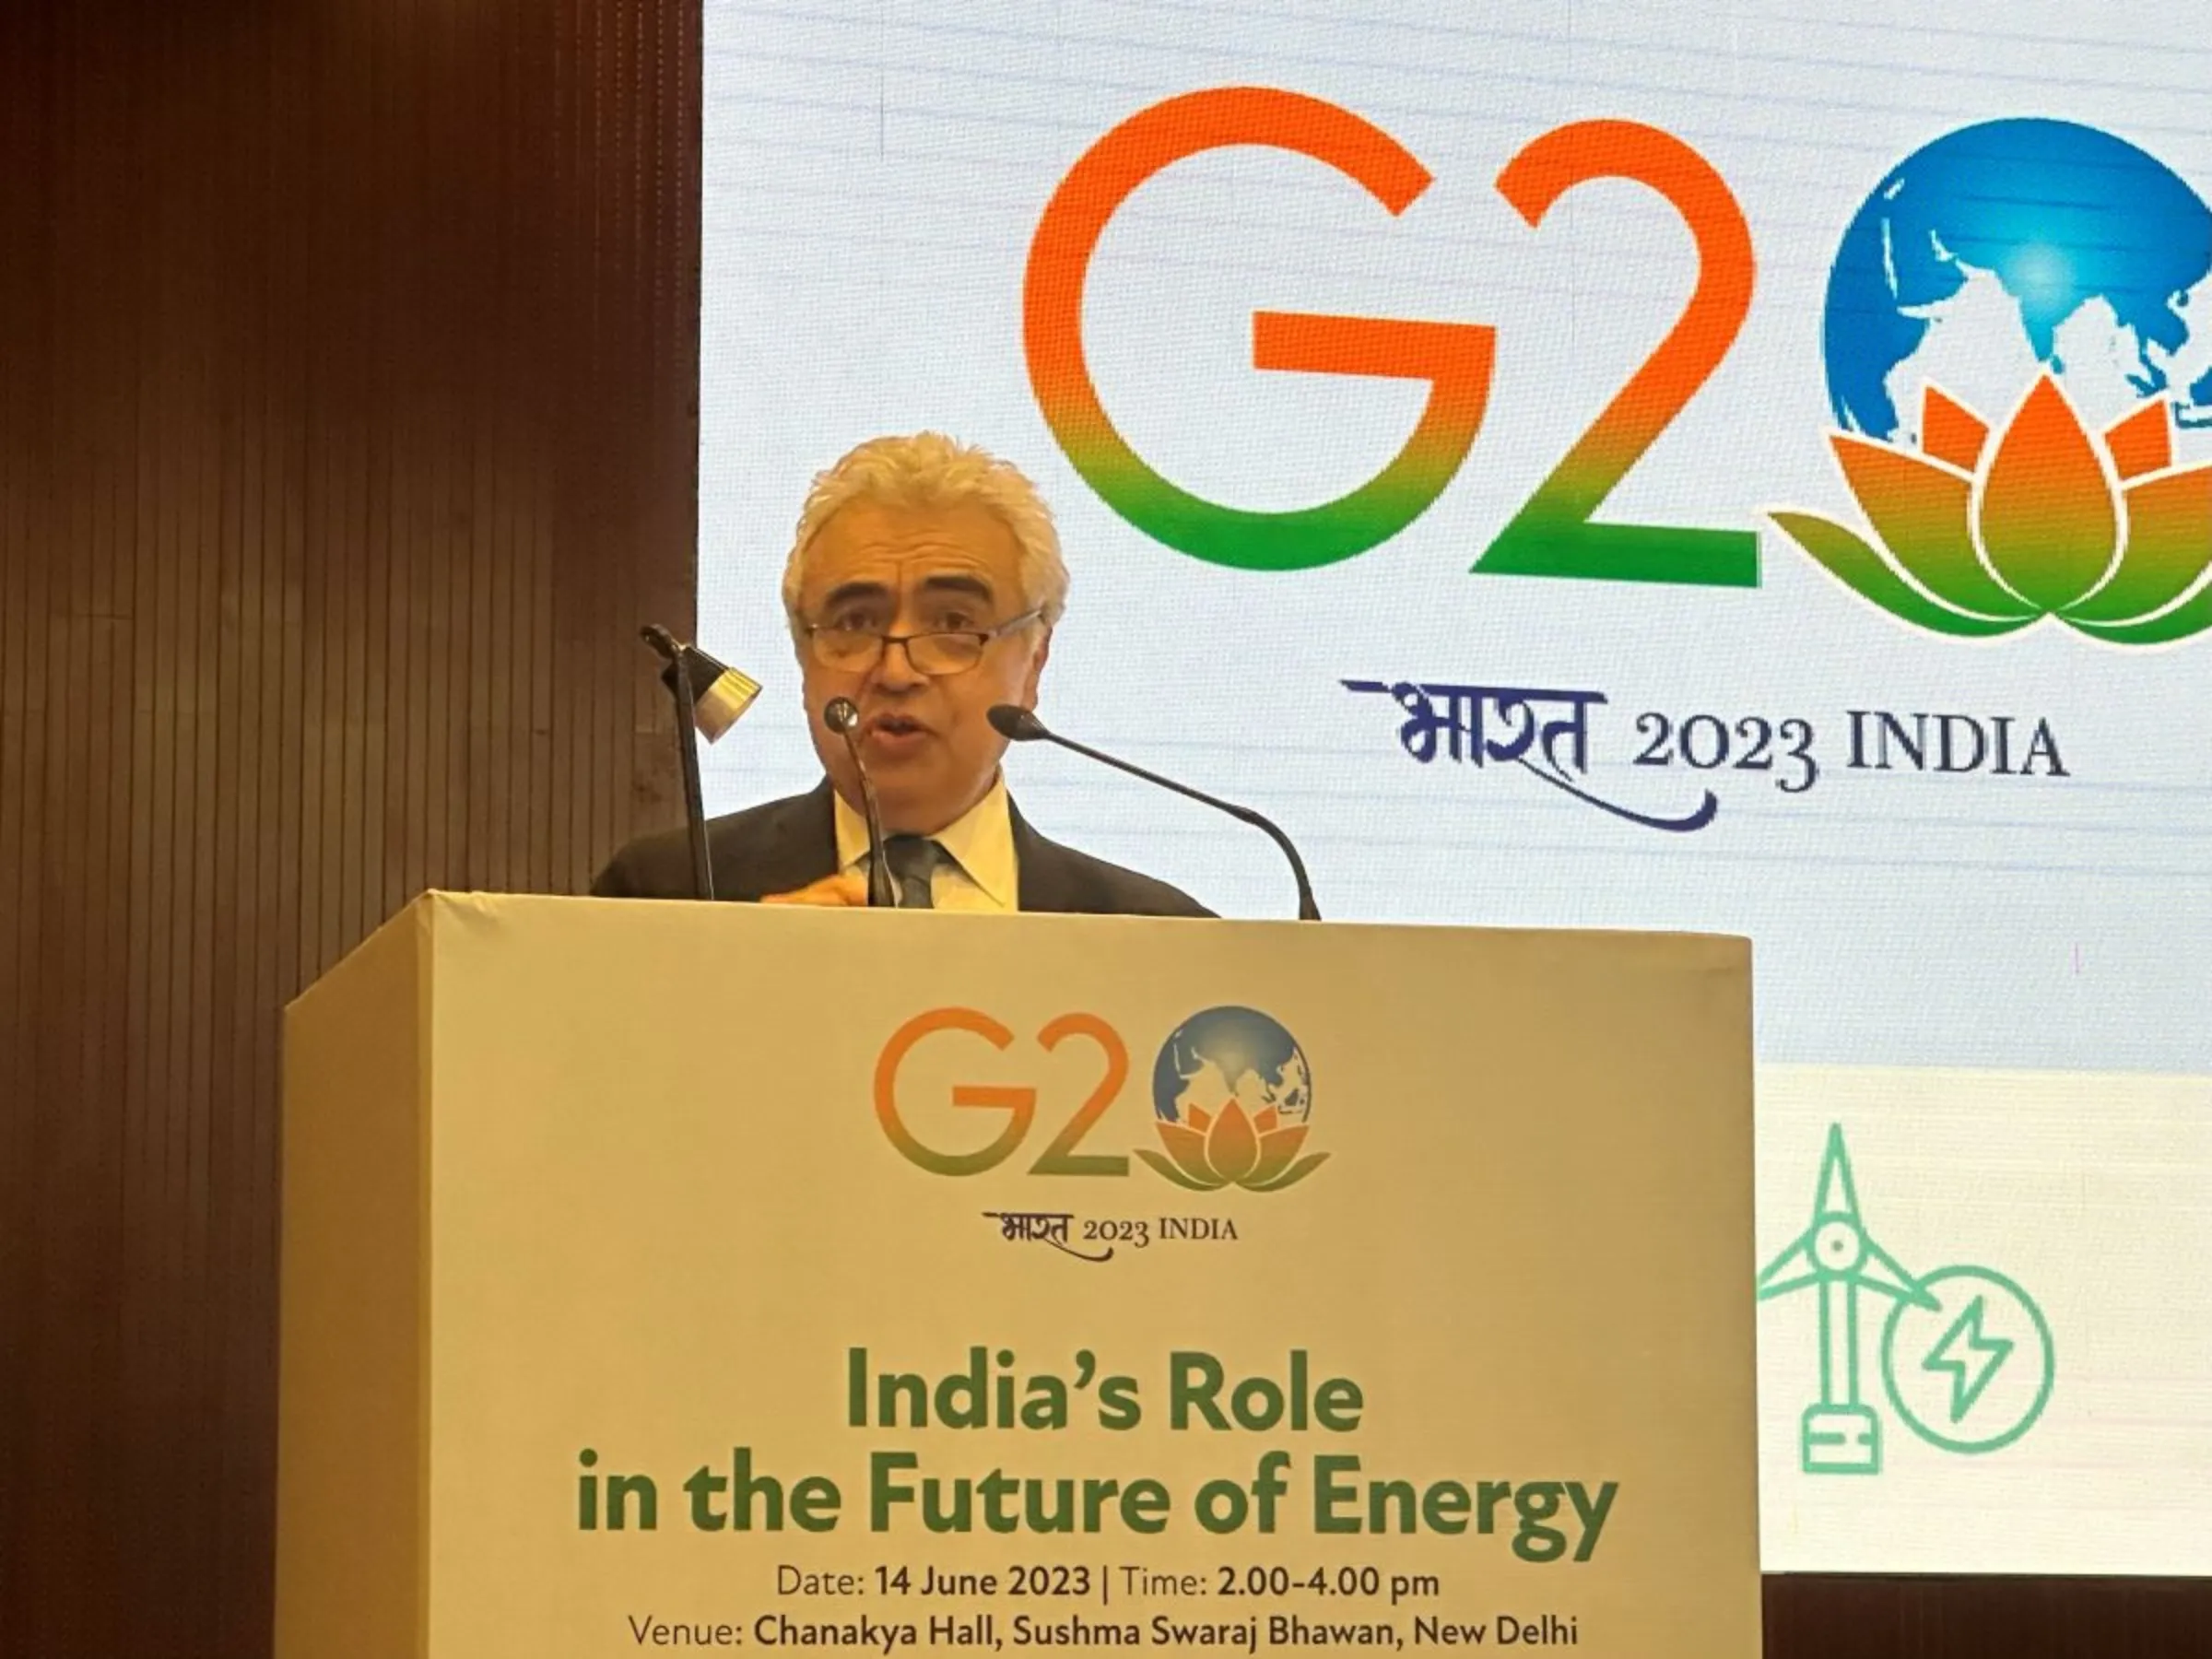 Fatih Birol, executive director of the International Energy Agency, speaks about the importance clean energy transition at a side event of G20 meetings in New Delhi, India, June 14, 2023